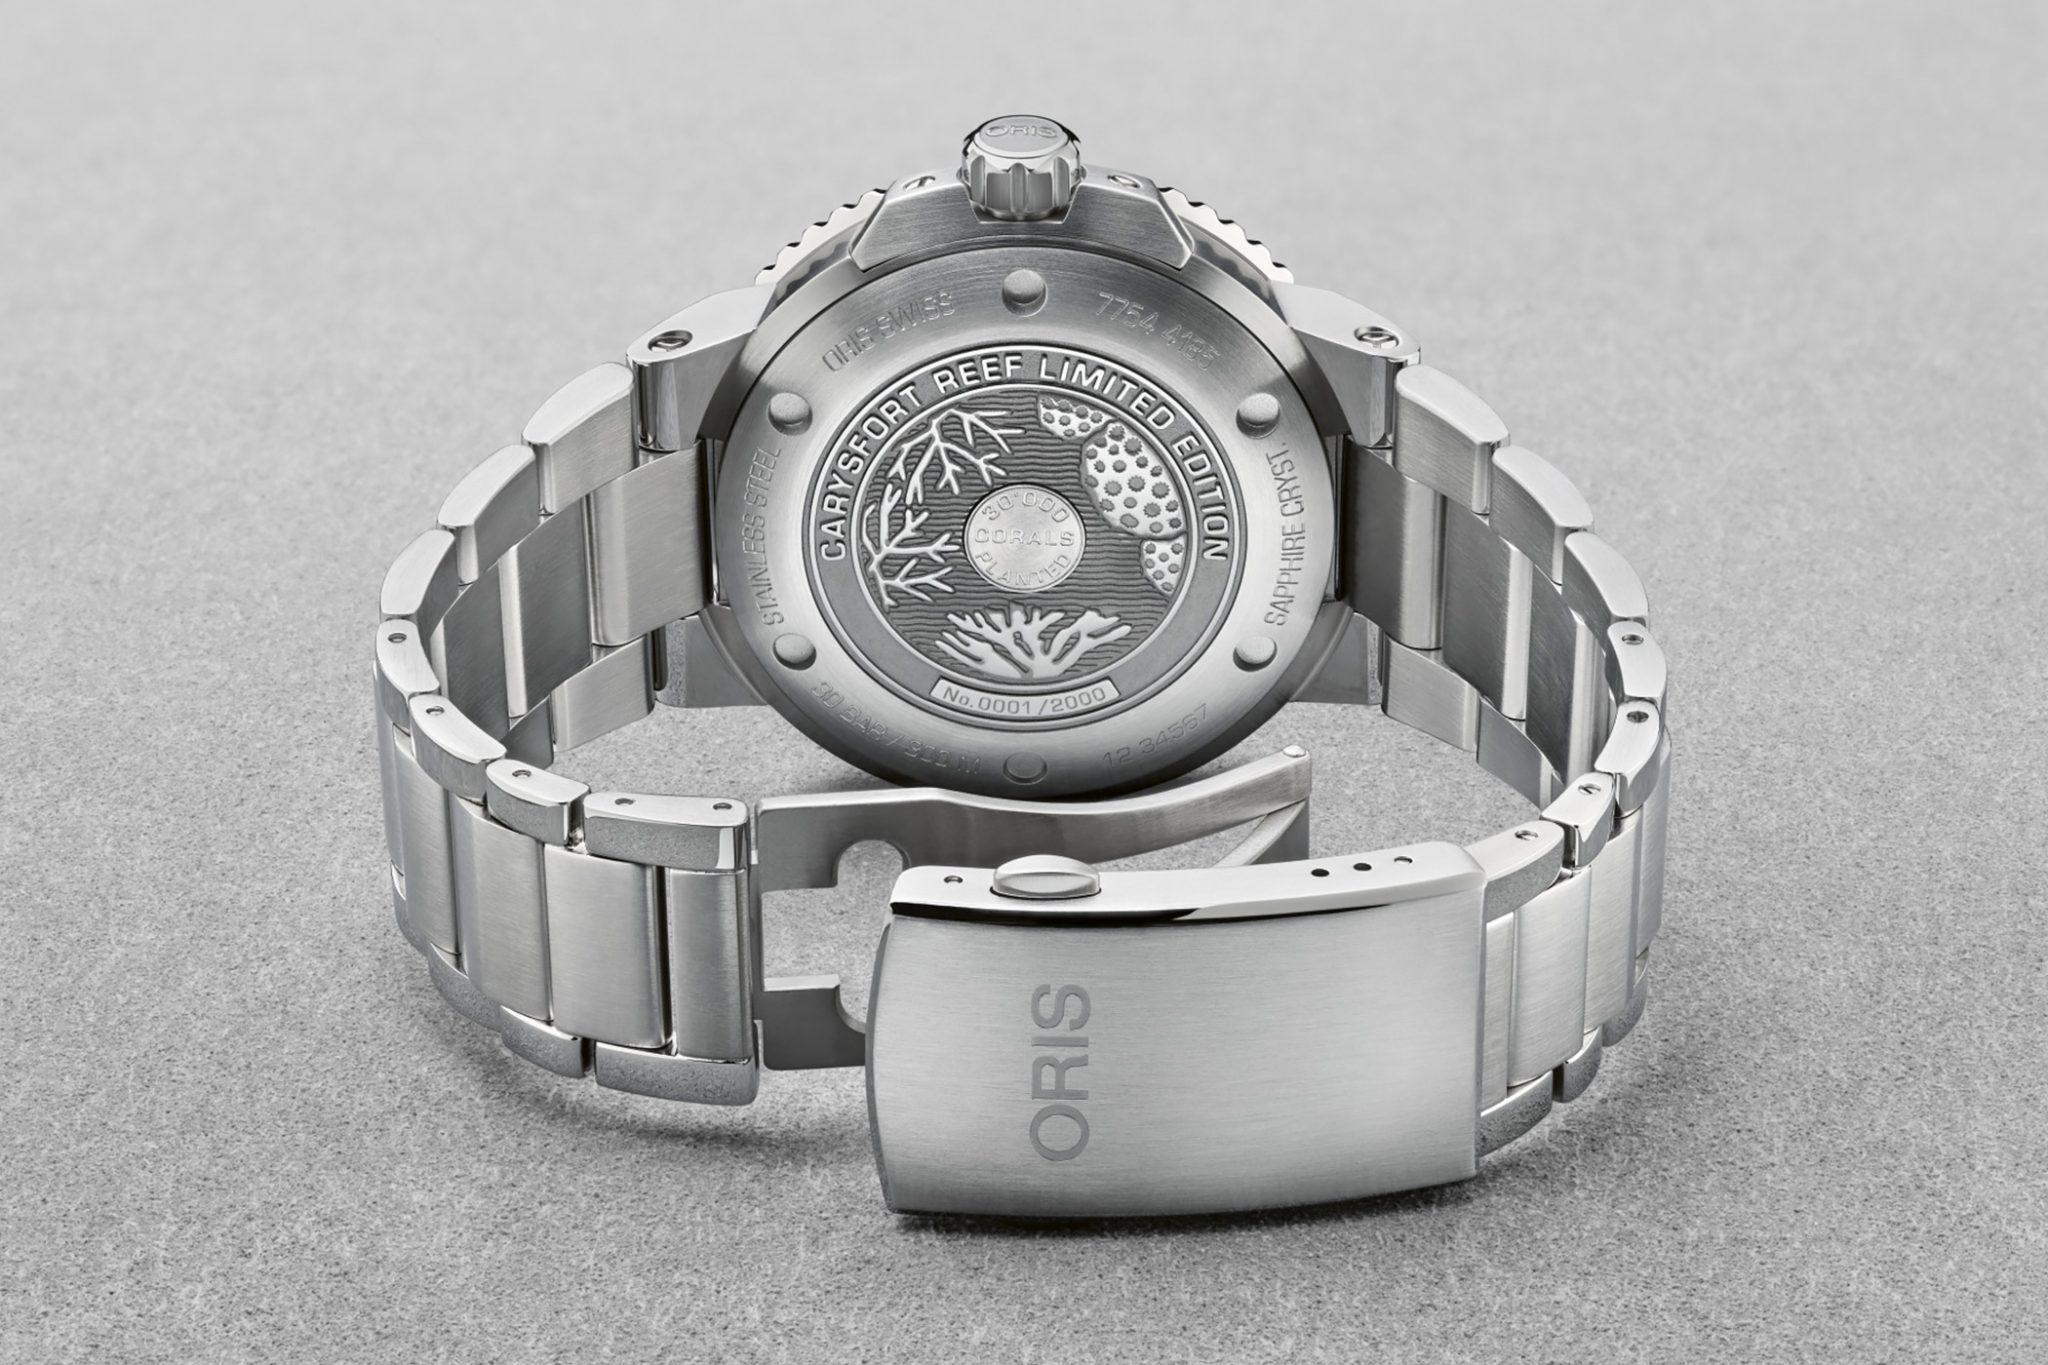 Oris-Carysfort-Reef-Limited-Edition-Support-Coral-Restoration-Foundation-ref-01-798-7754-4185